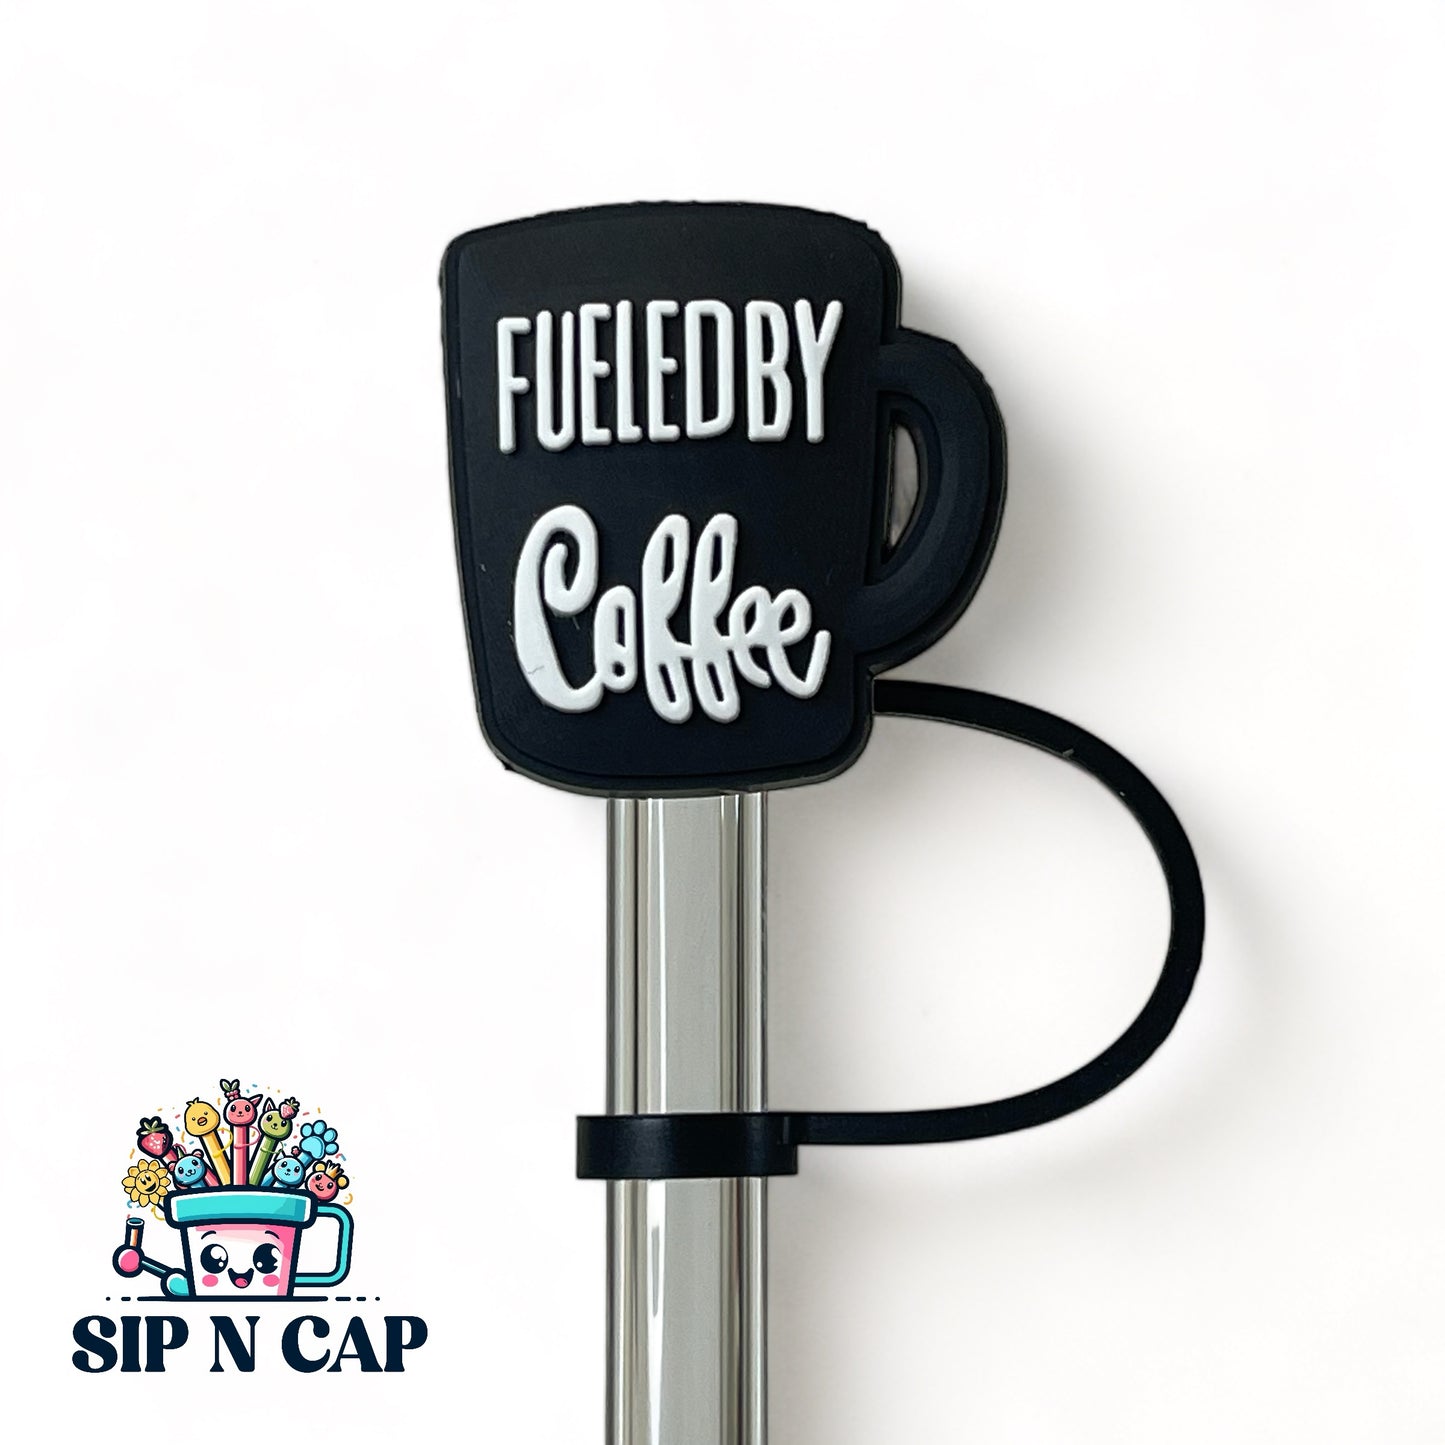 Coffee Quotation Straw Topper